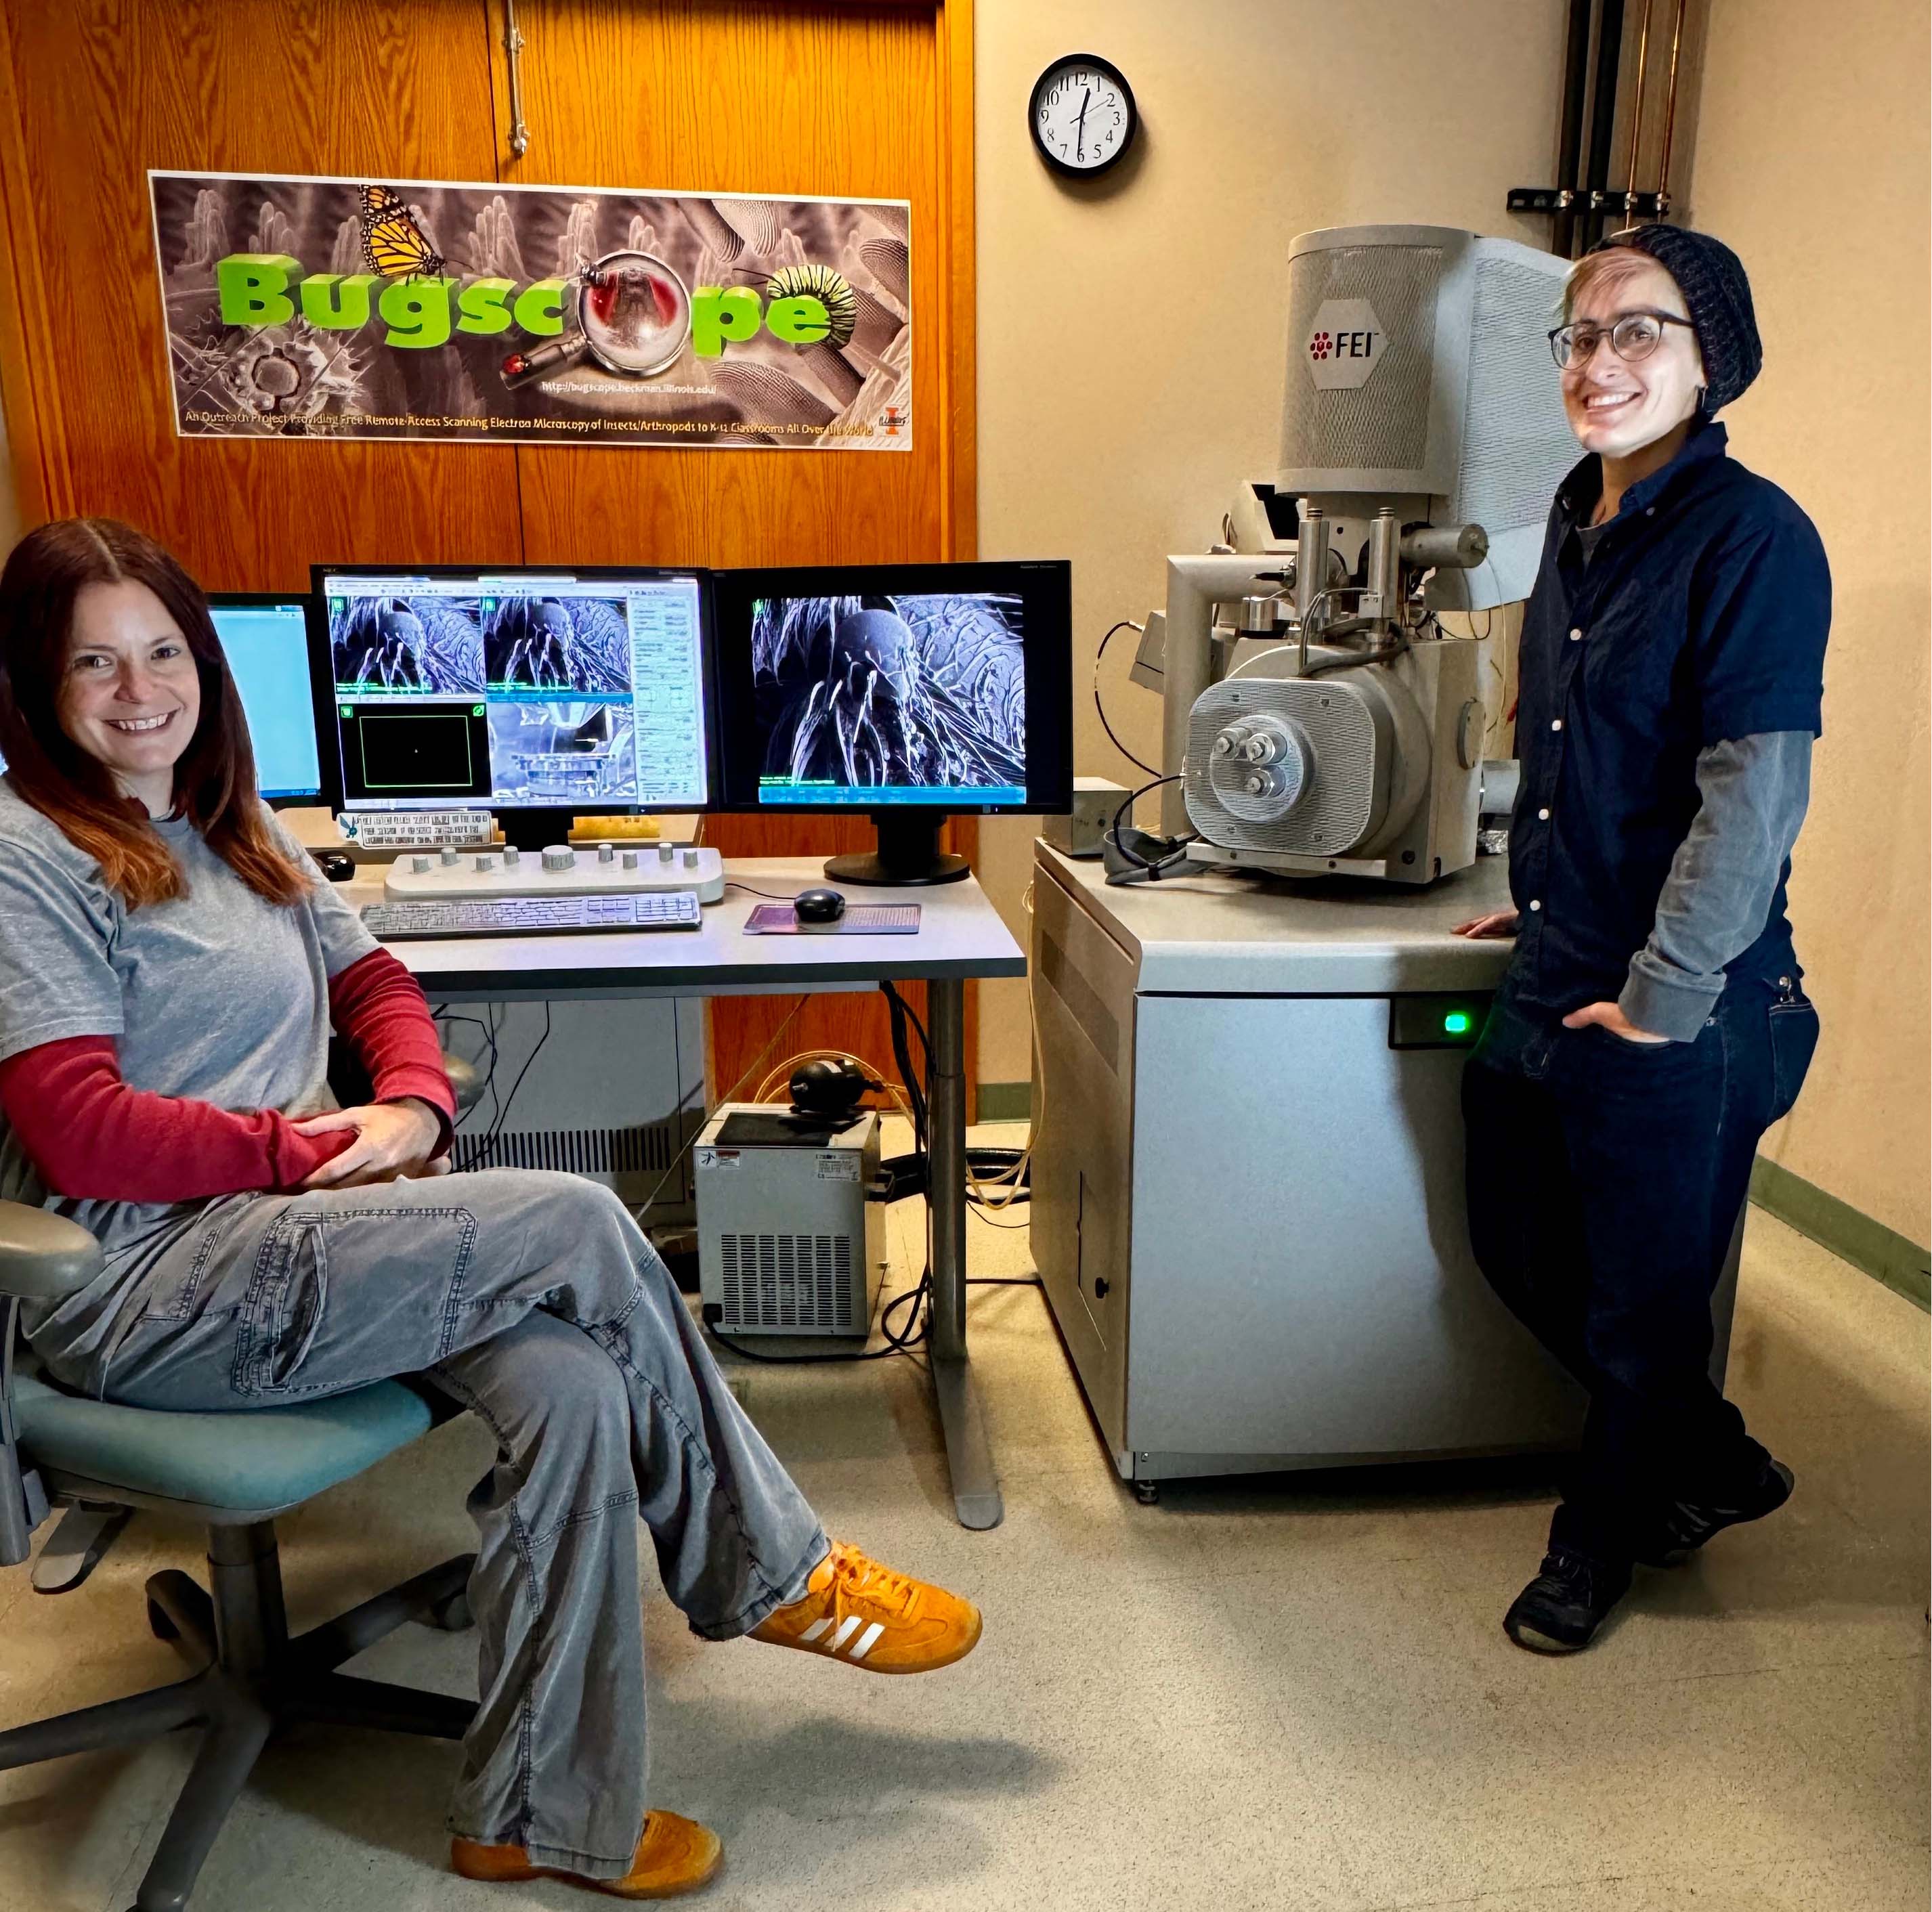 Cate Wallace (left) and T. Josek in front of the environmental scanning electron microscope used for Bugscope in the Beckman Institute's Microscopy Suite.